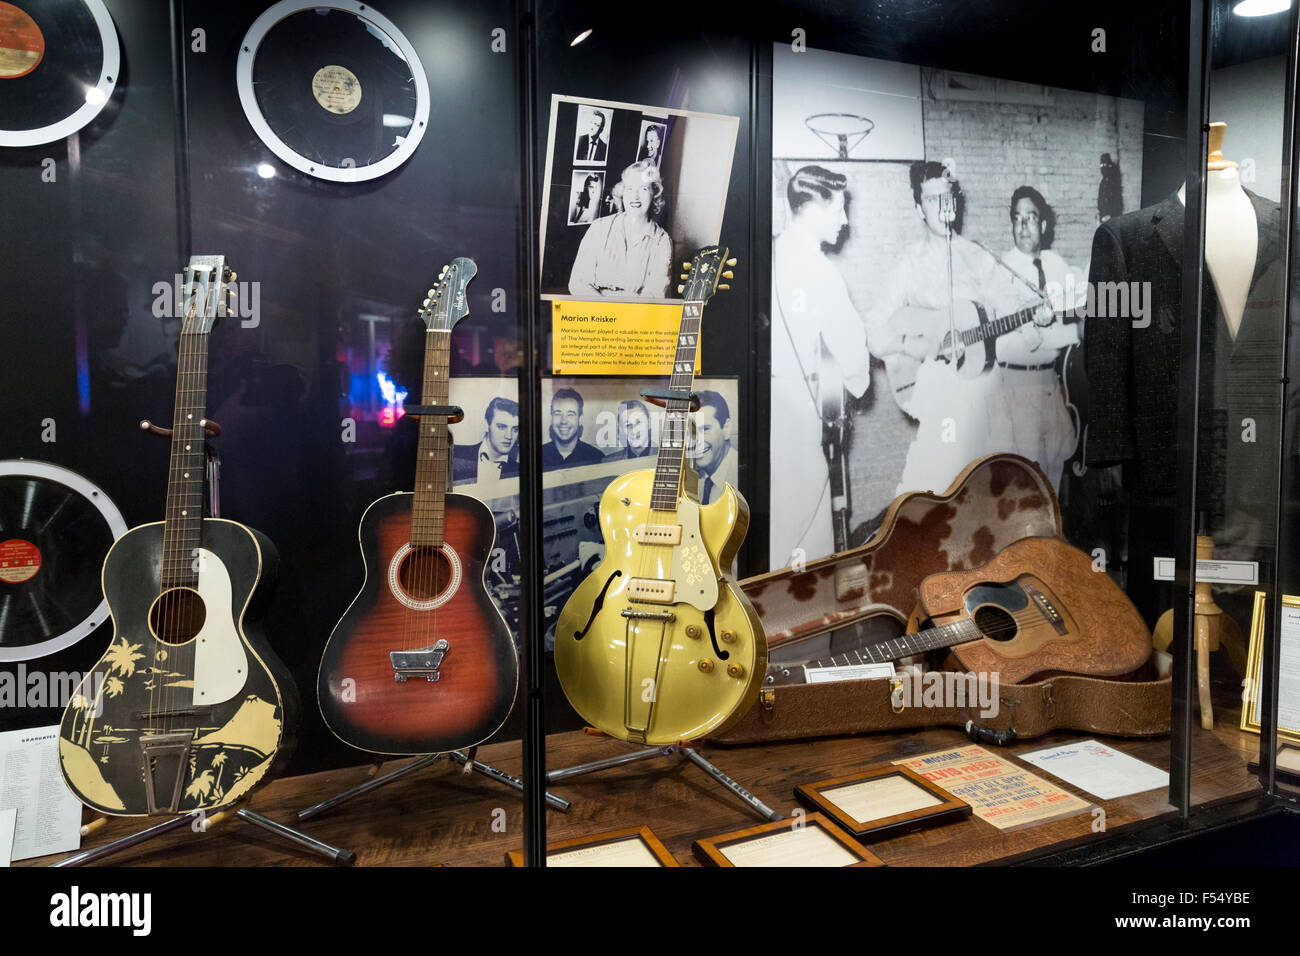 Exhibit at Sun Studio birthplace of rock and roll stars Elvis Presley, Johnny Cash, Jerry Lee Lewis, Carl Perkins, Memphis USA Stock Photo